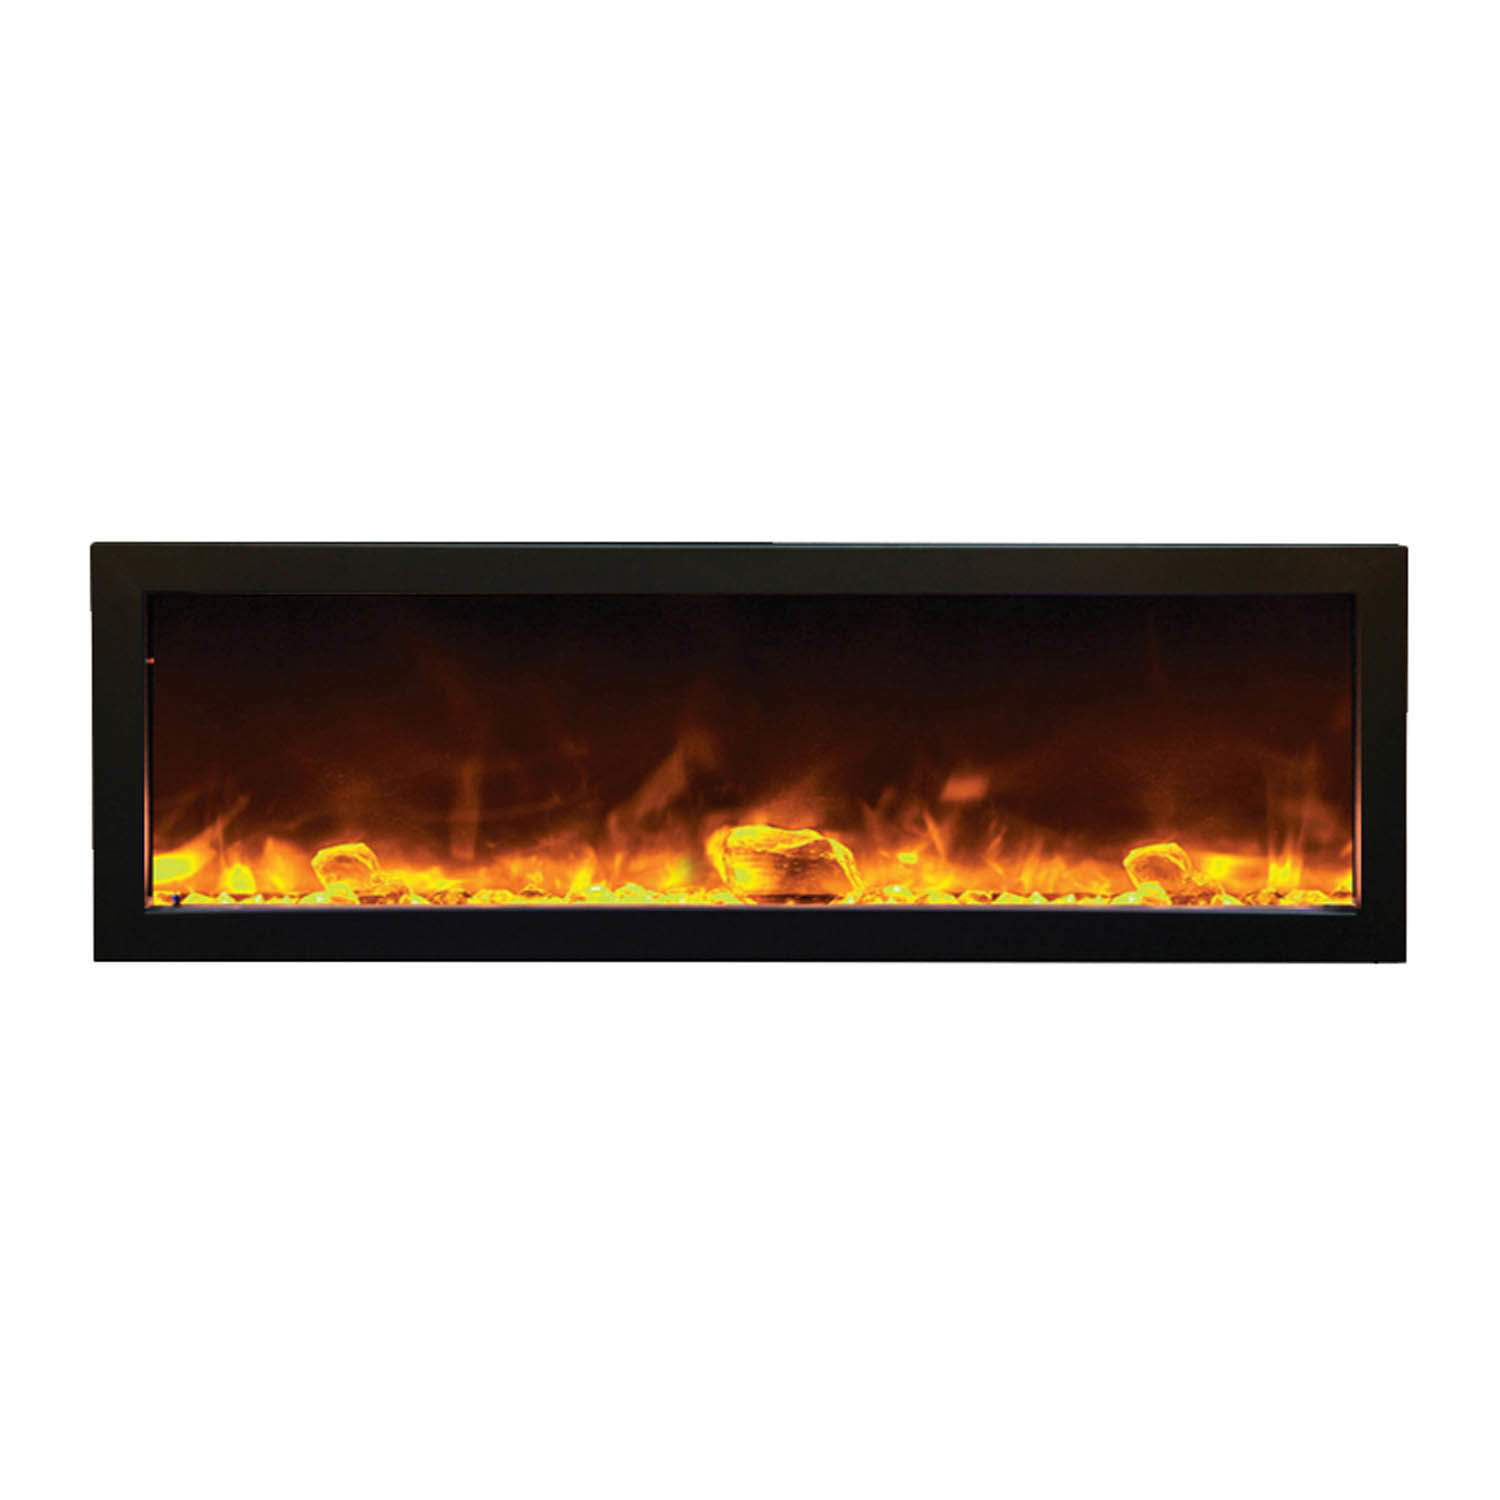 Smart 50" Electric Deep Built-in only comes with optional black steel surround